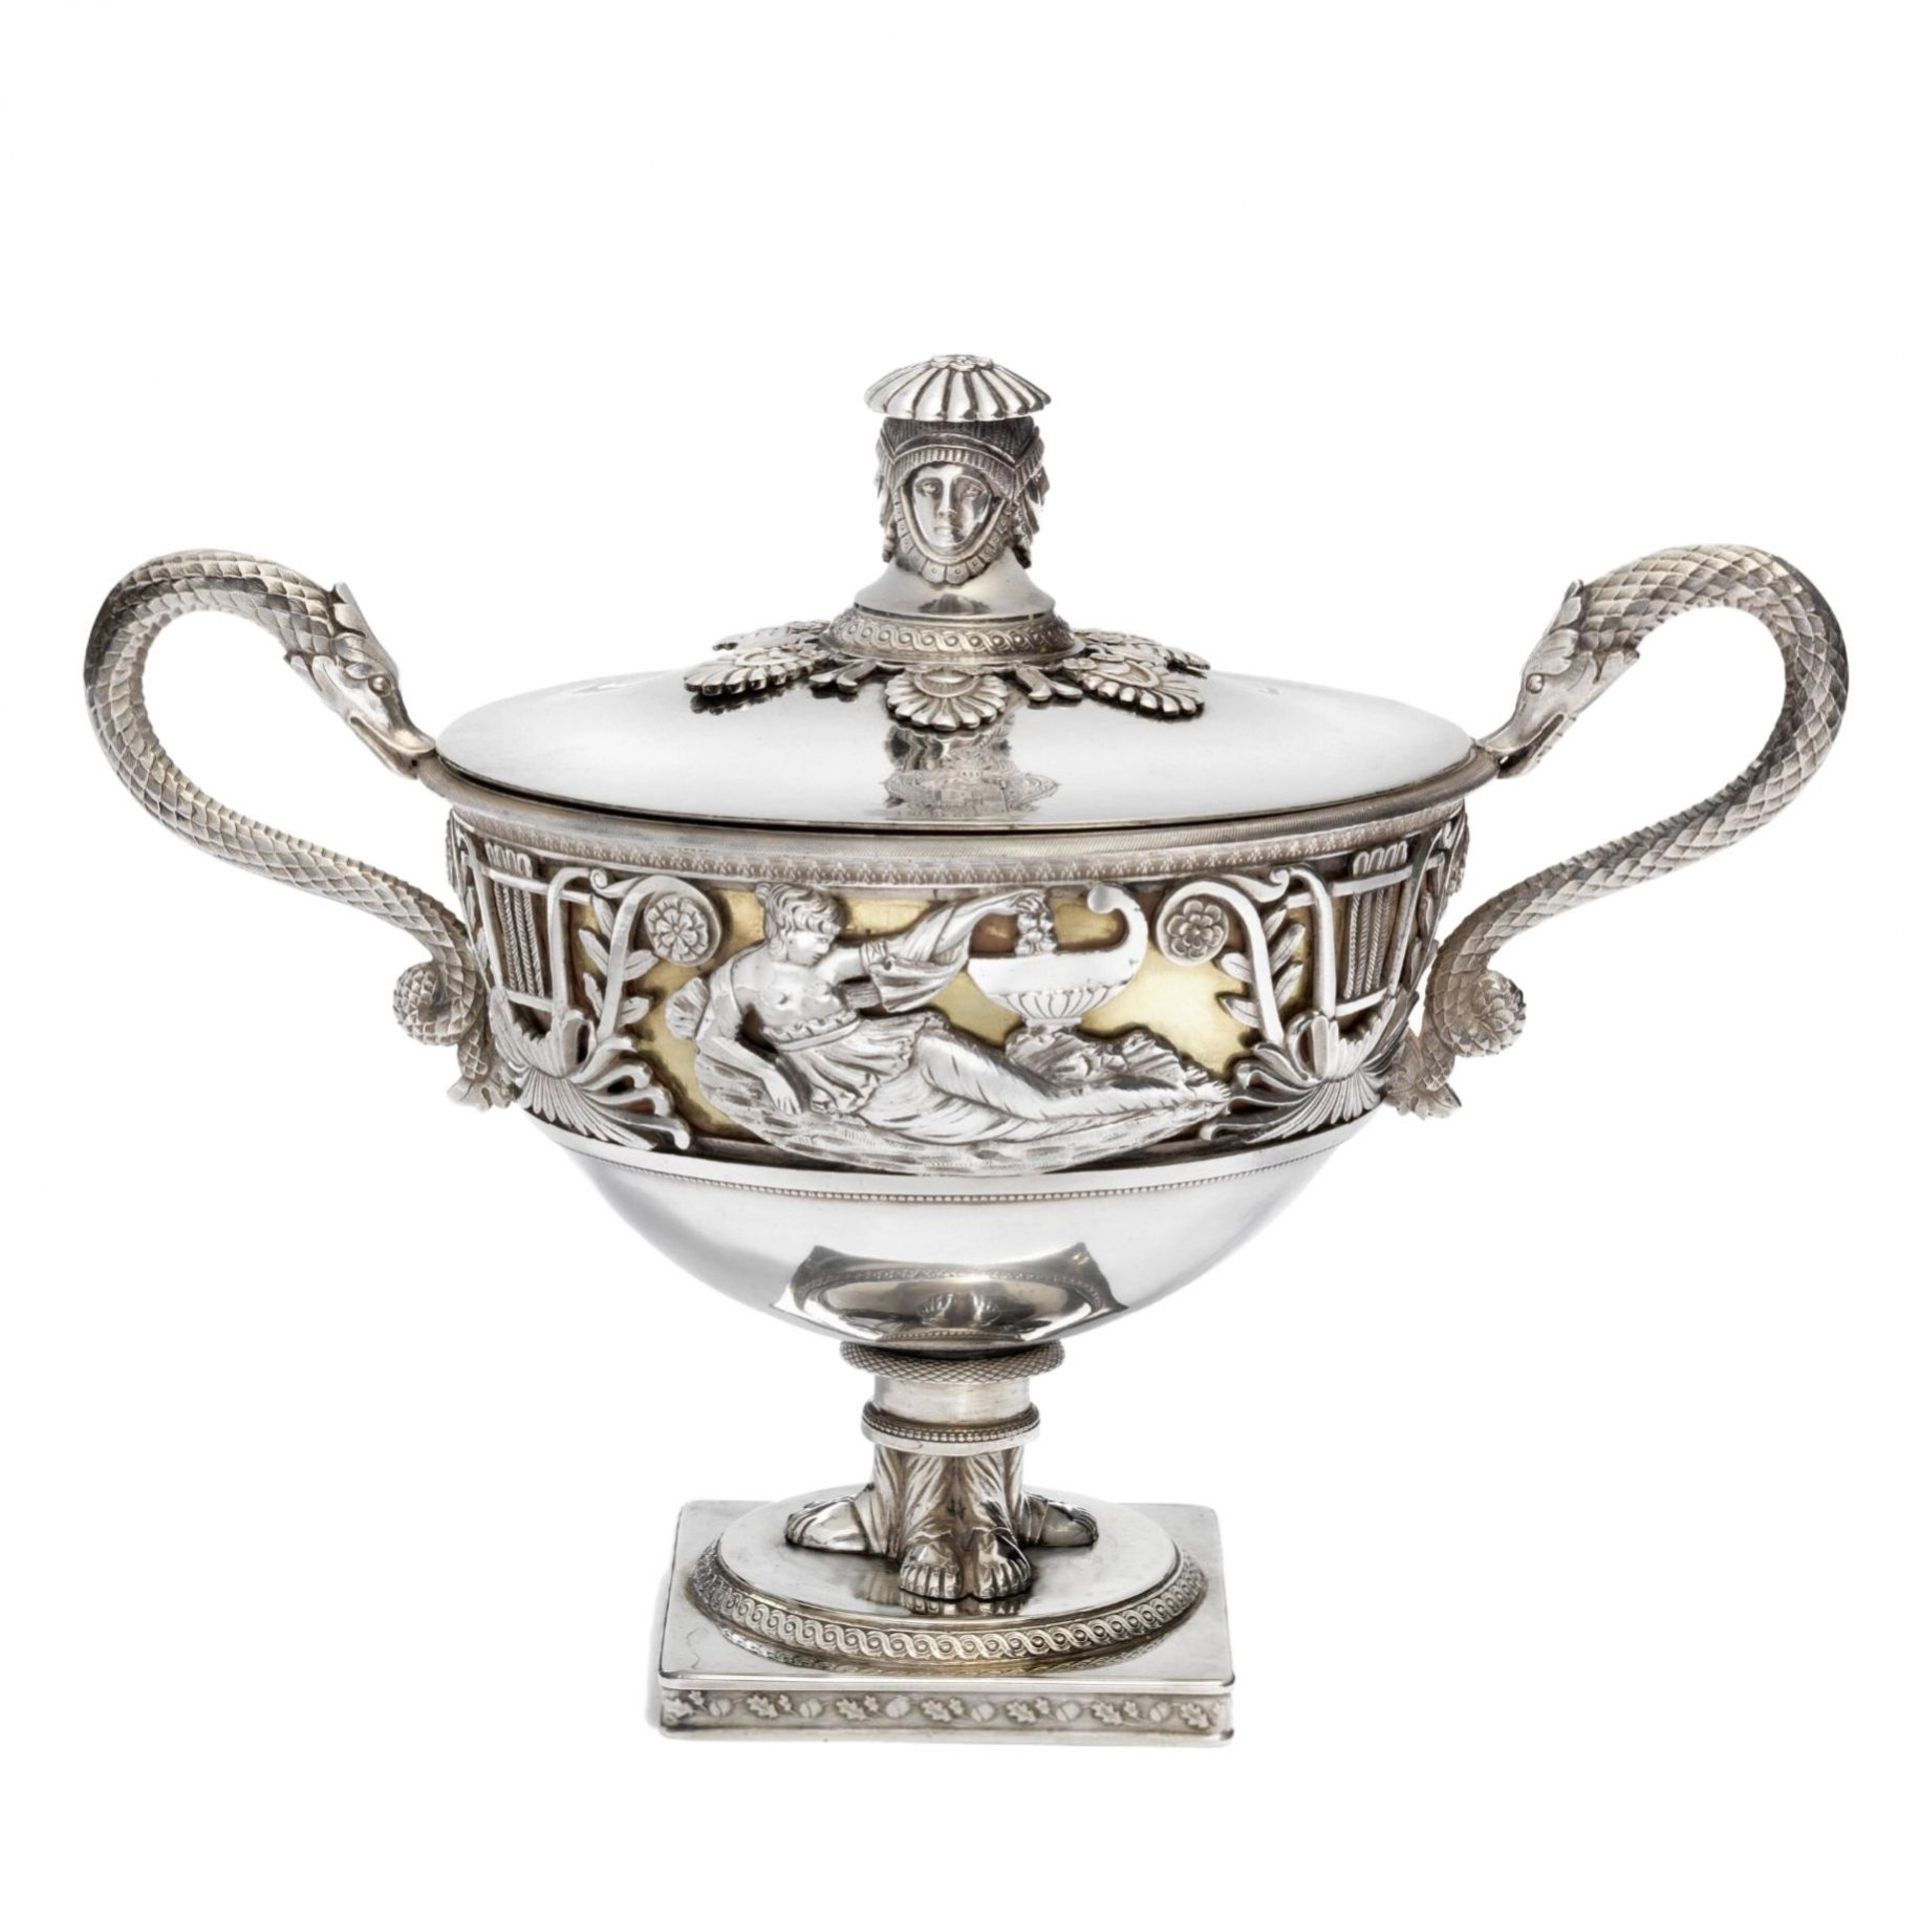 Silver bonbonniere. Russian Empire, St. Petersburg, workshop Axel Hedlund. Turn of the 18-19th c. - Image 2 of 6